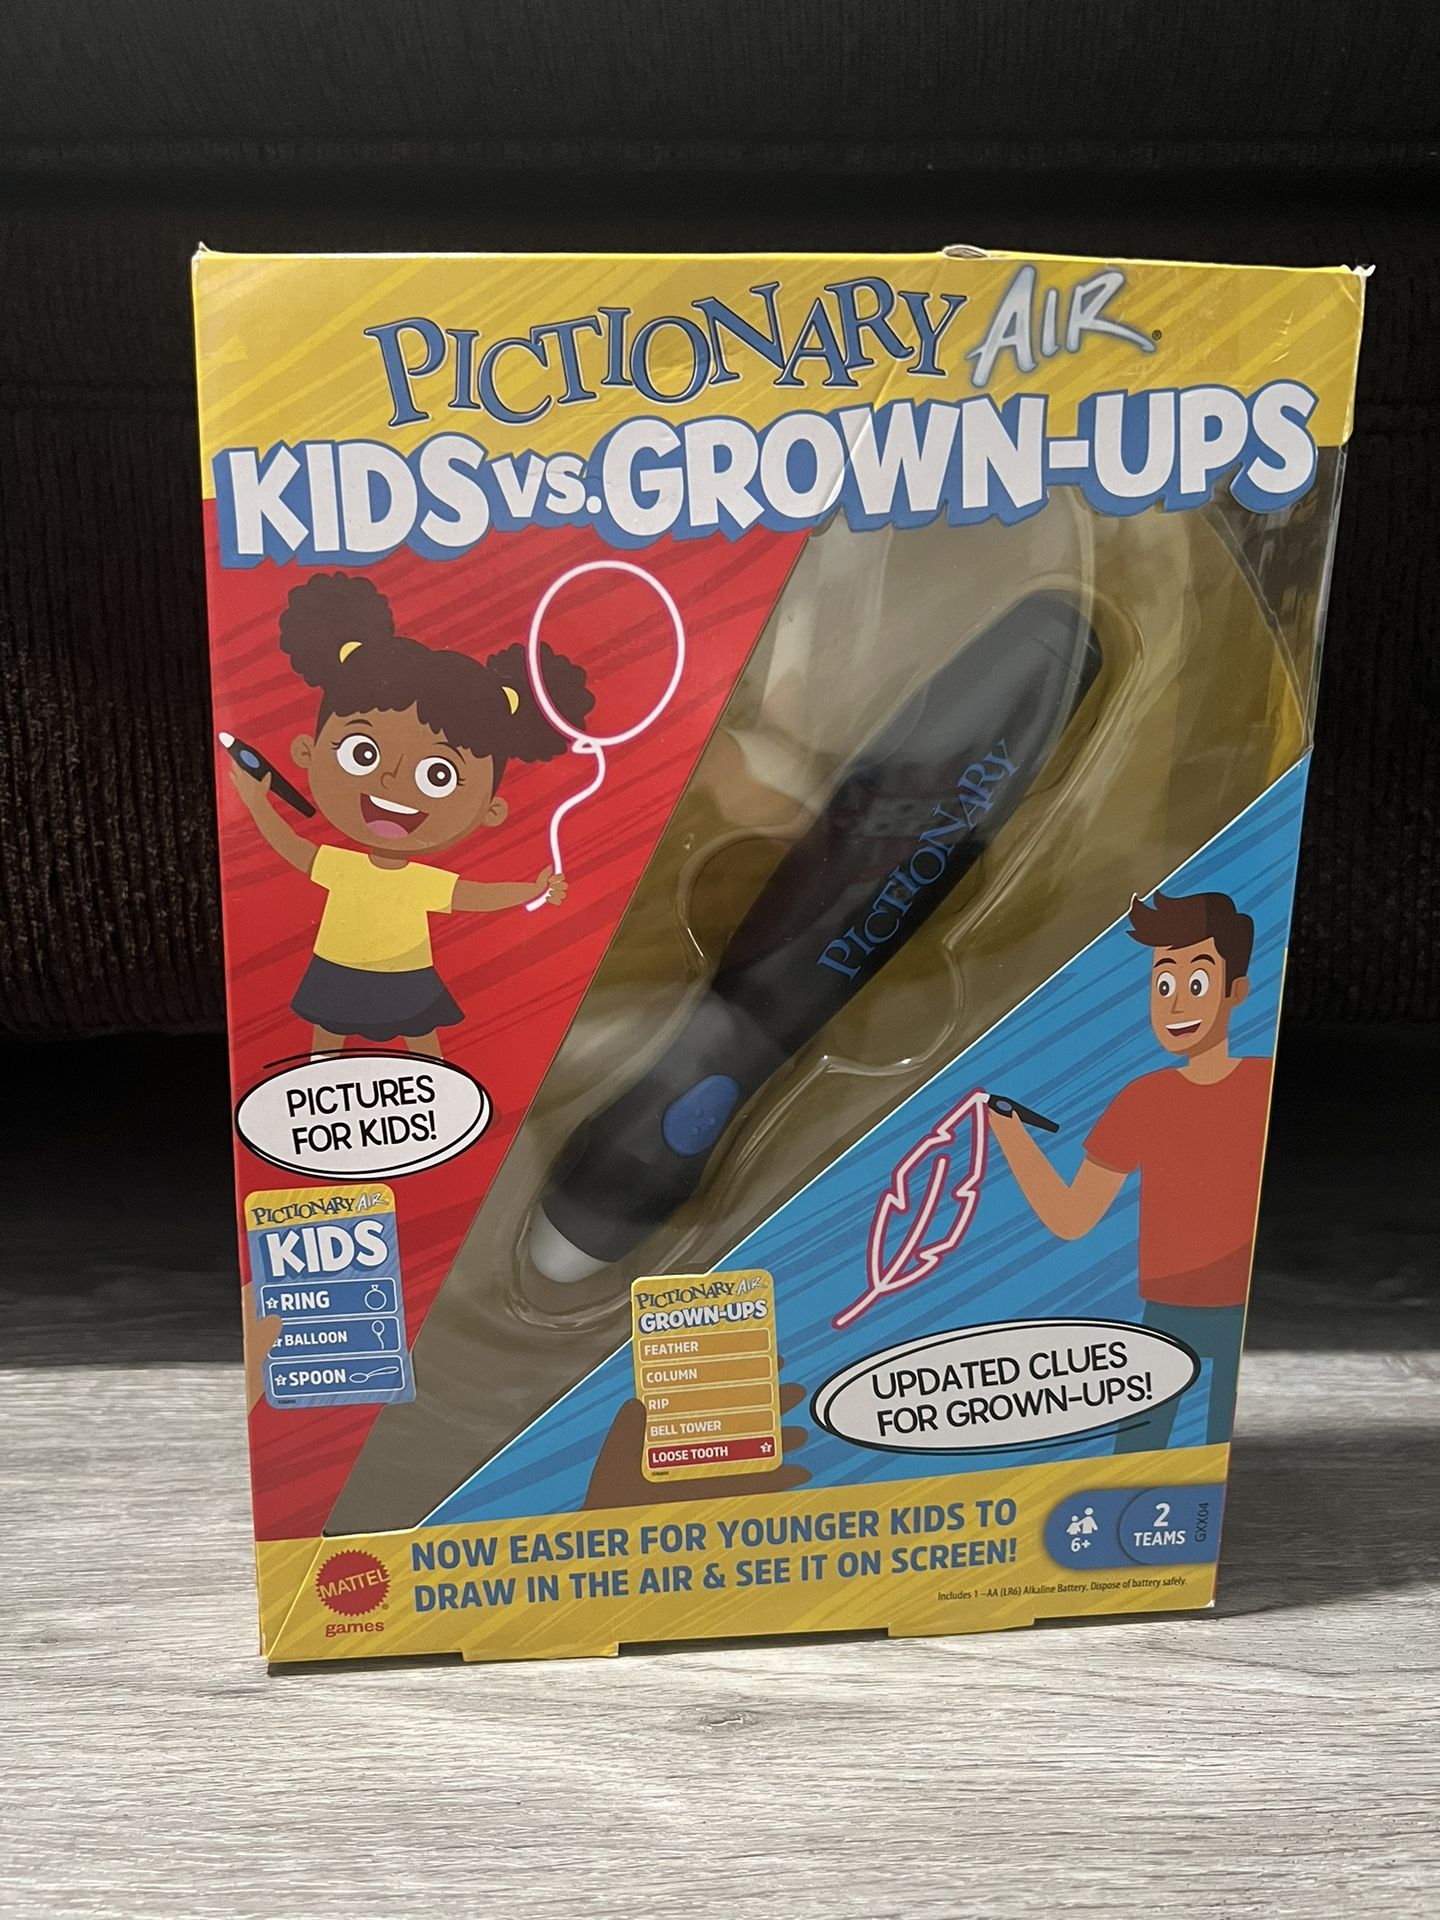 pictionary air kids 